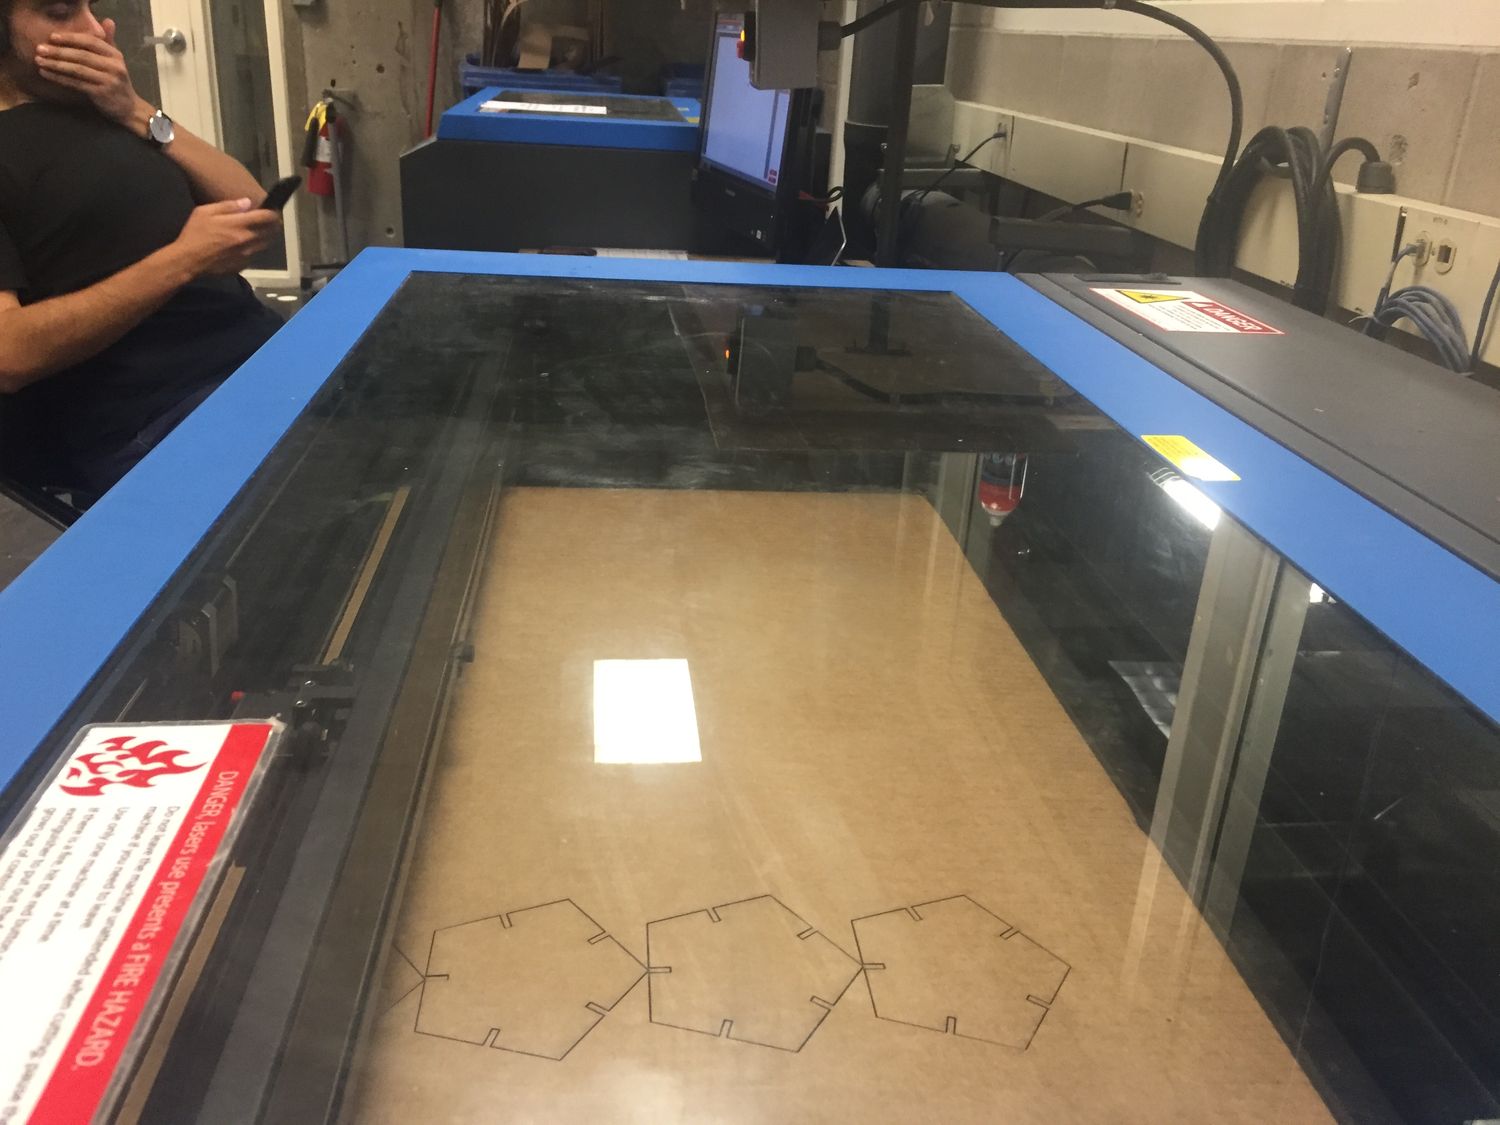 Blue laser cutting machine with a person yawning in the background